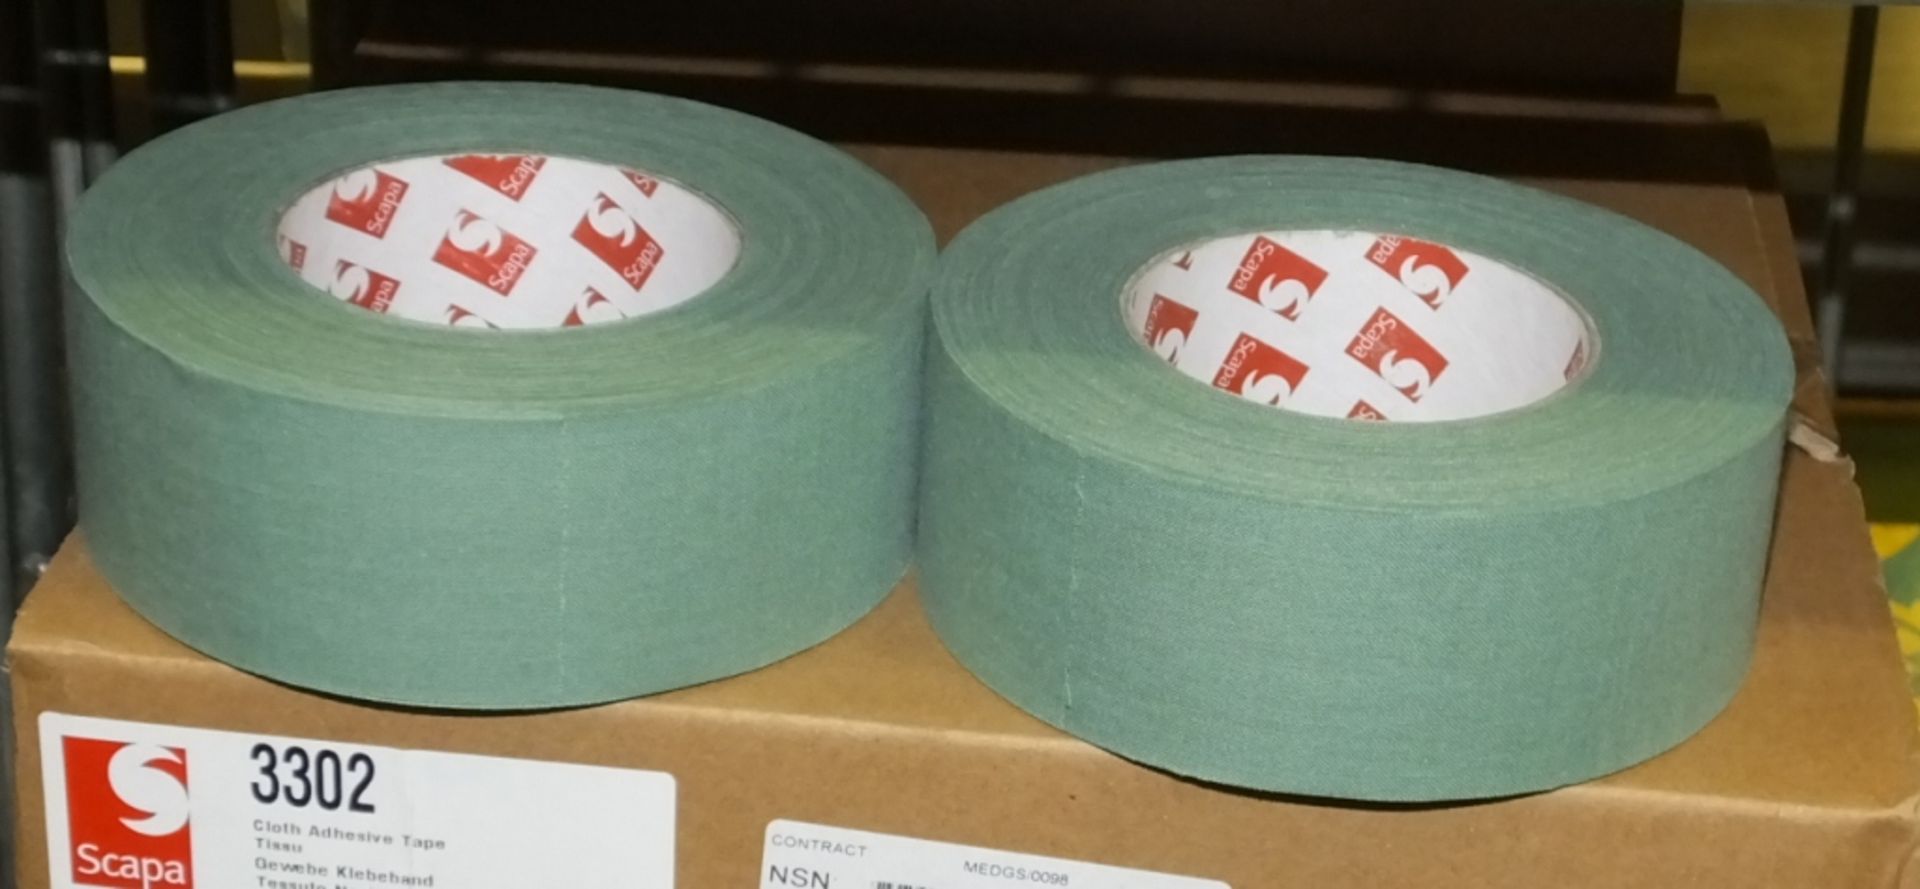 Scapa Ilive Green Tape 50mm x 50M - 16 per box - 2 boxes - Image 2 of 3